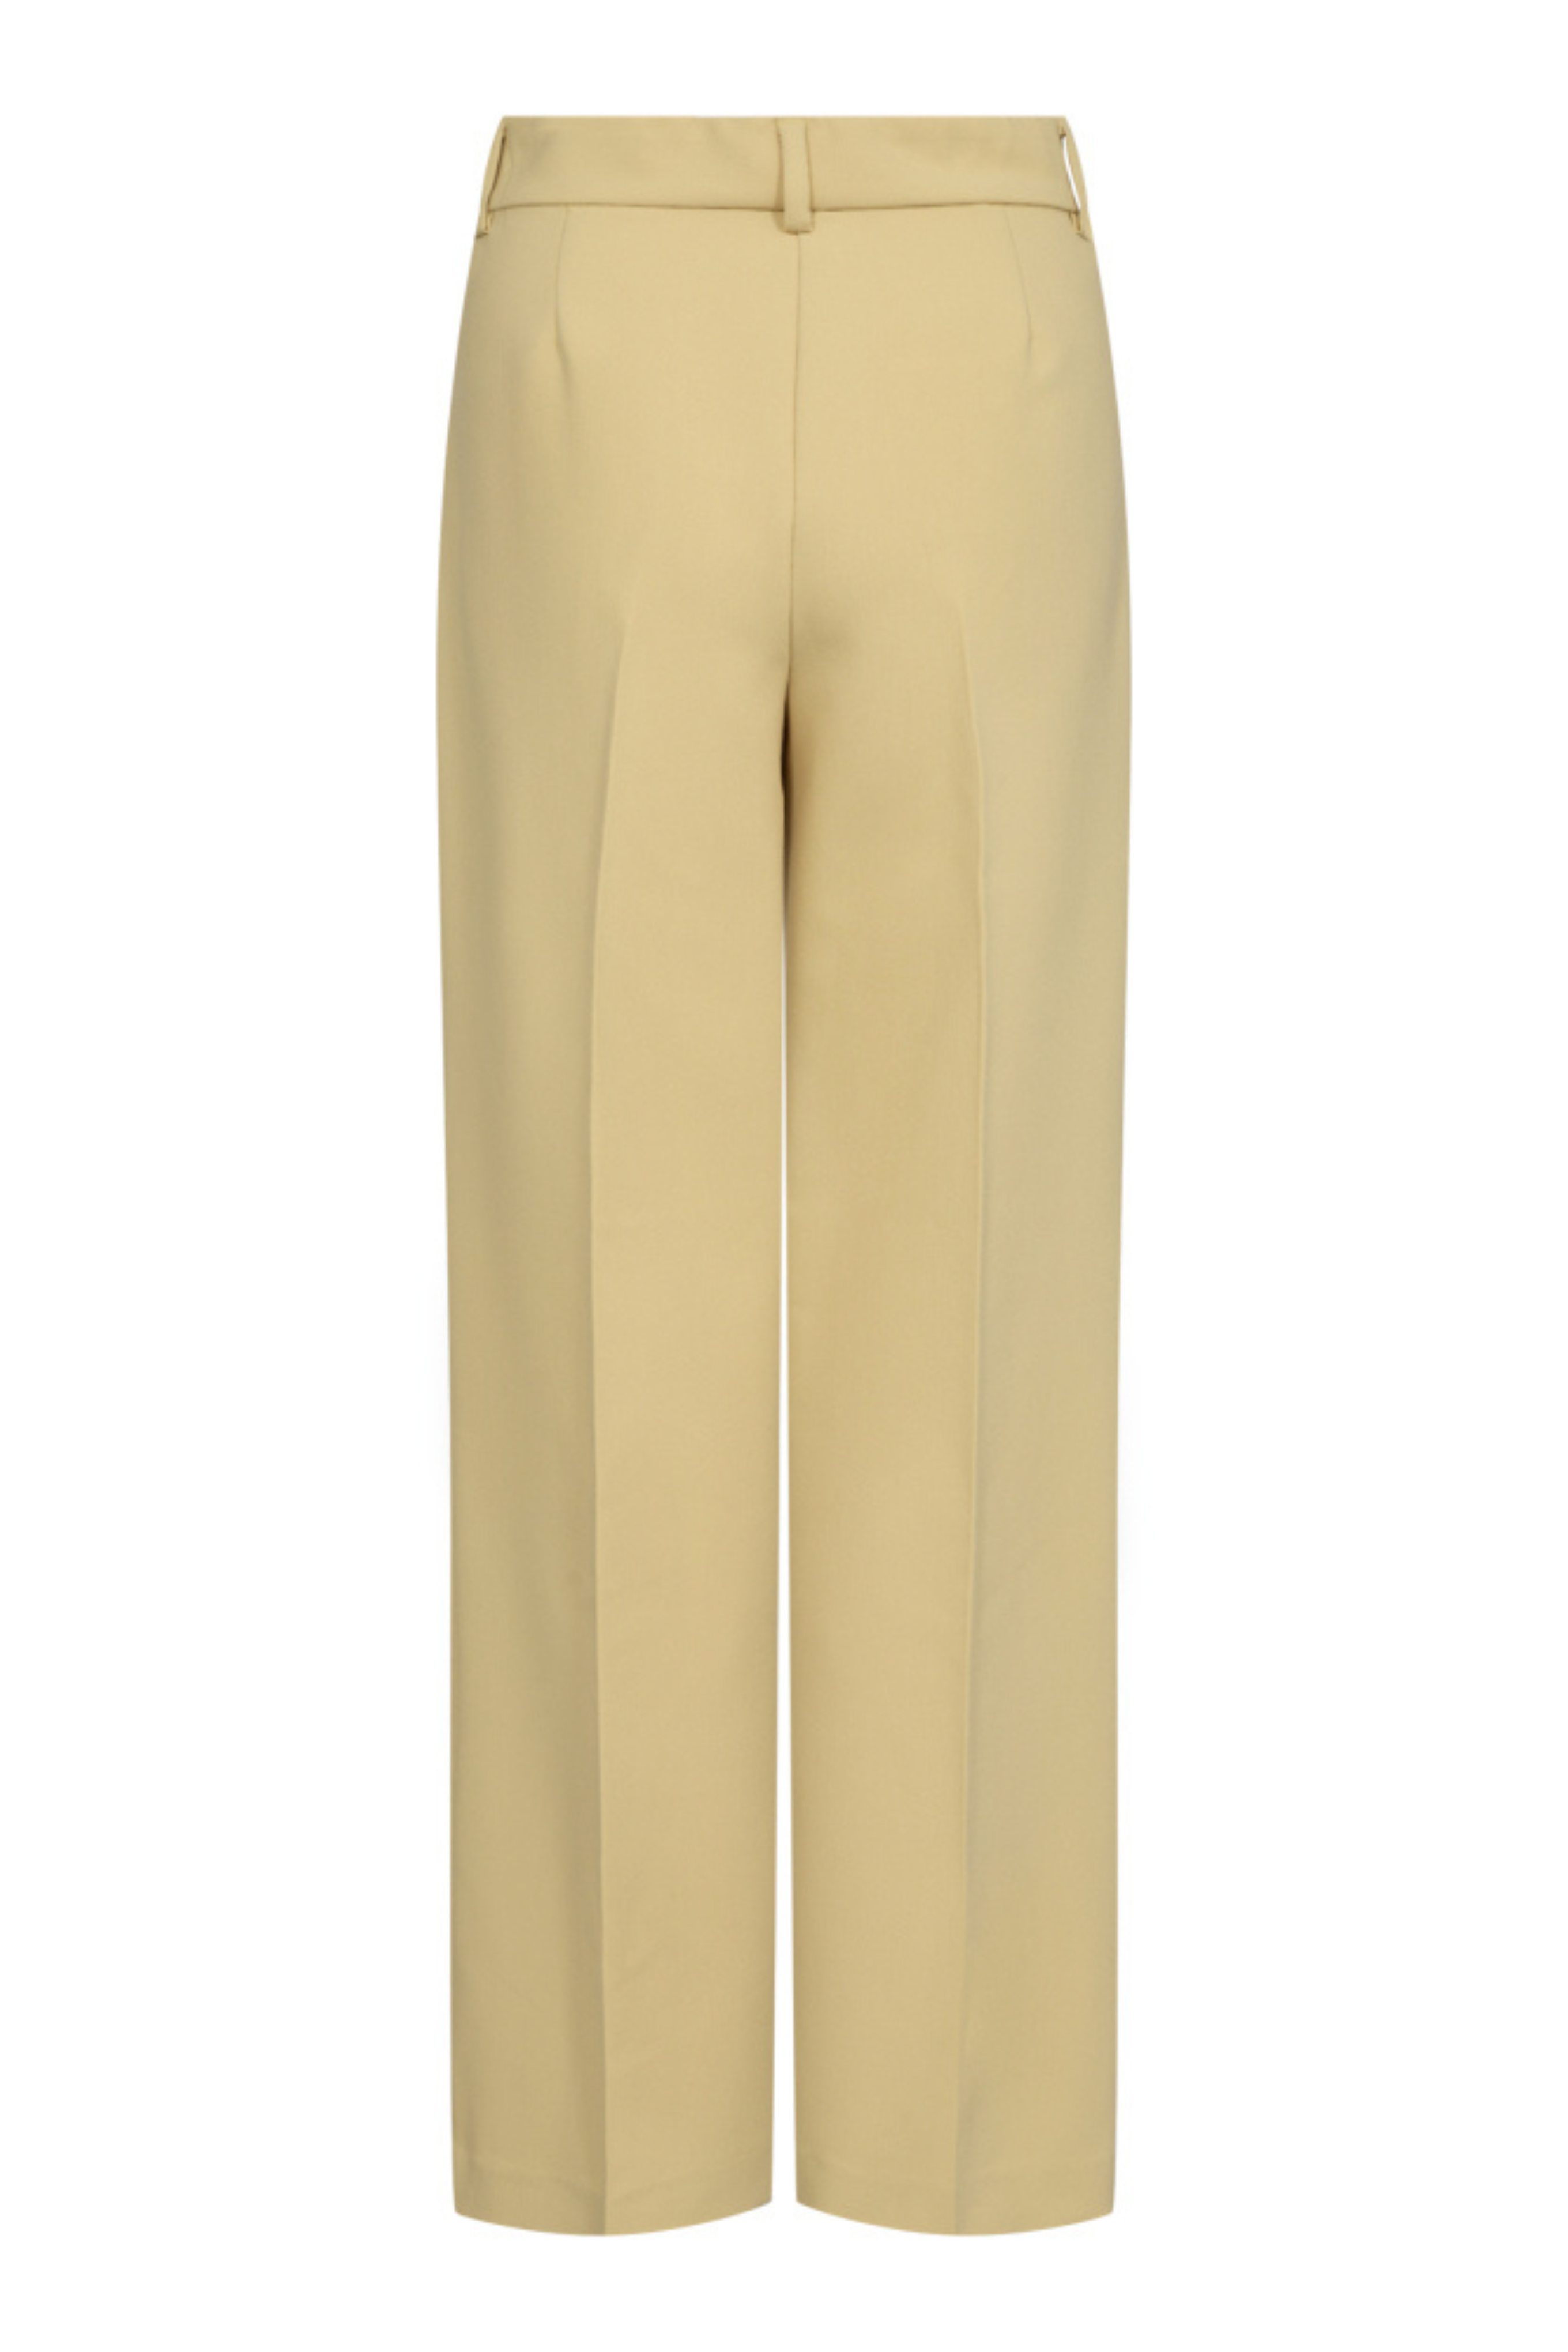 31191 - VOLACC WIDE PANTS - PALE YELLOW